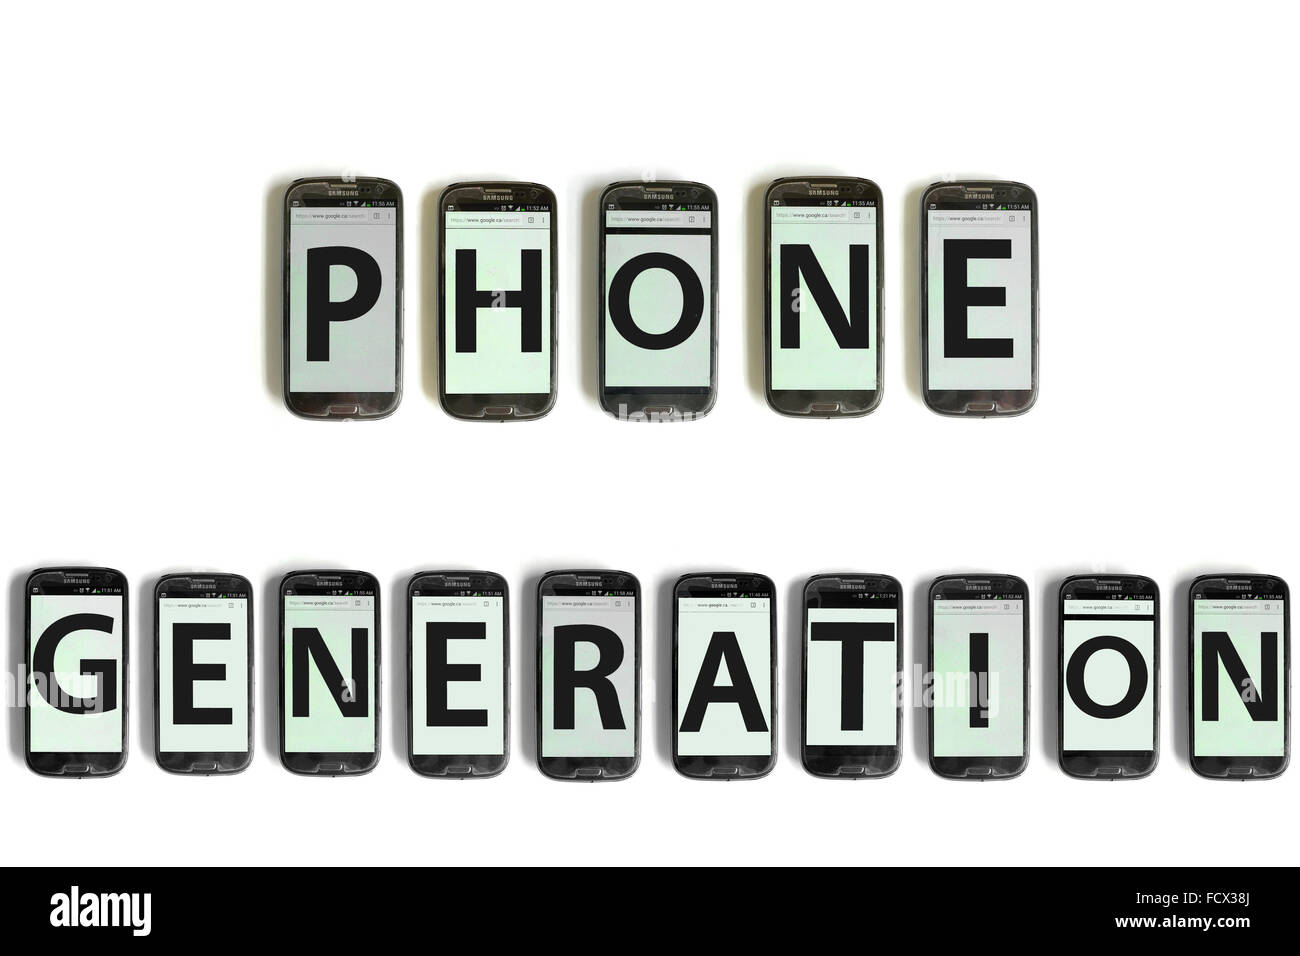 Phone Generation on the screens of smartphones photographed against a white background. Stock Photo